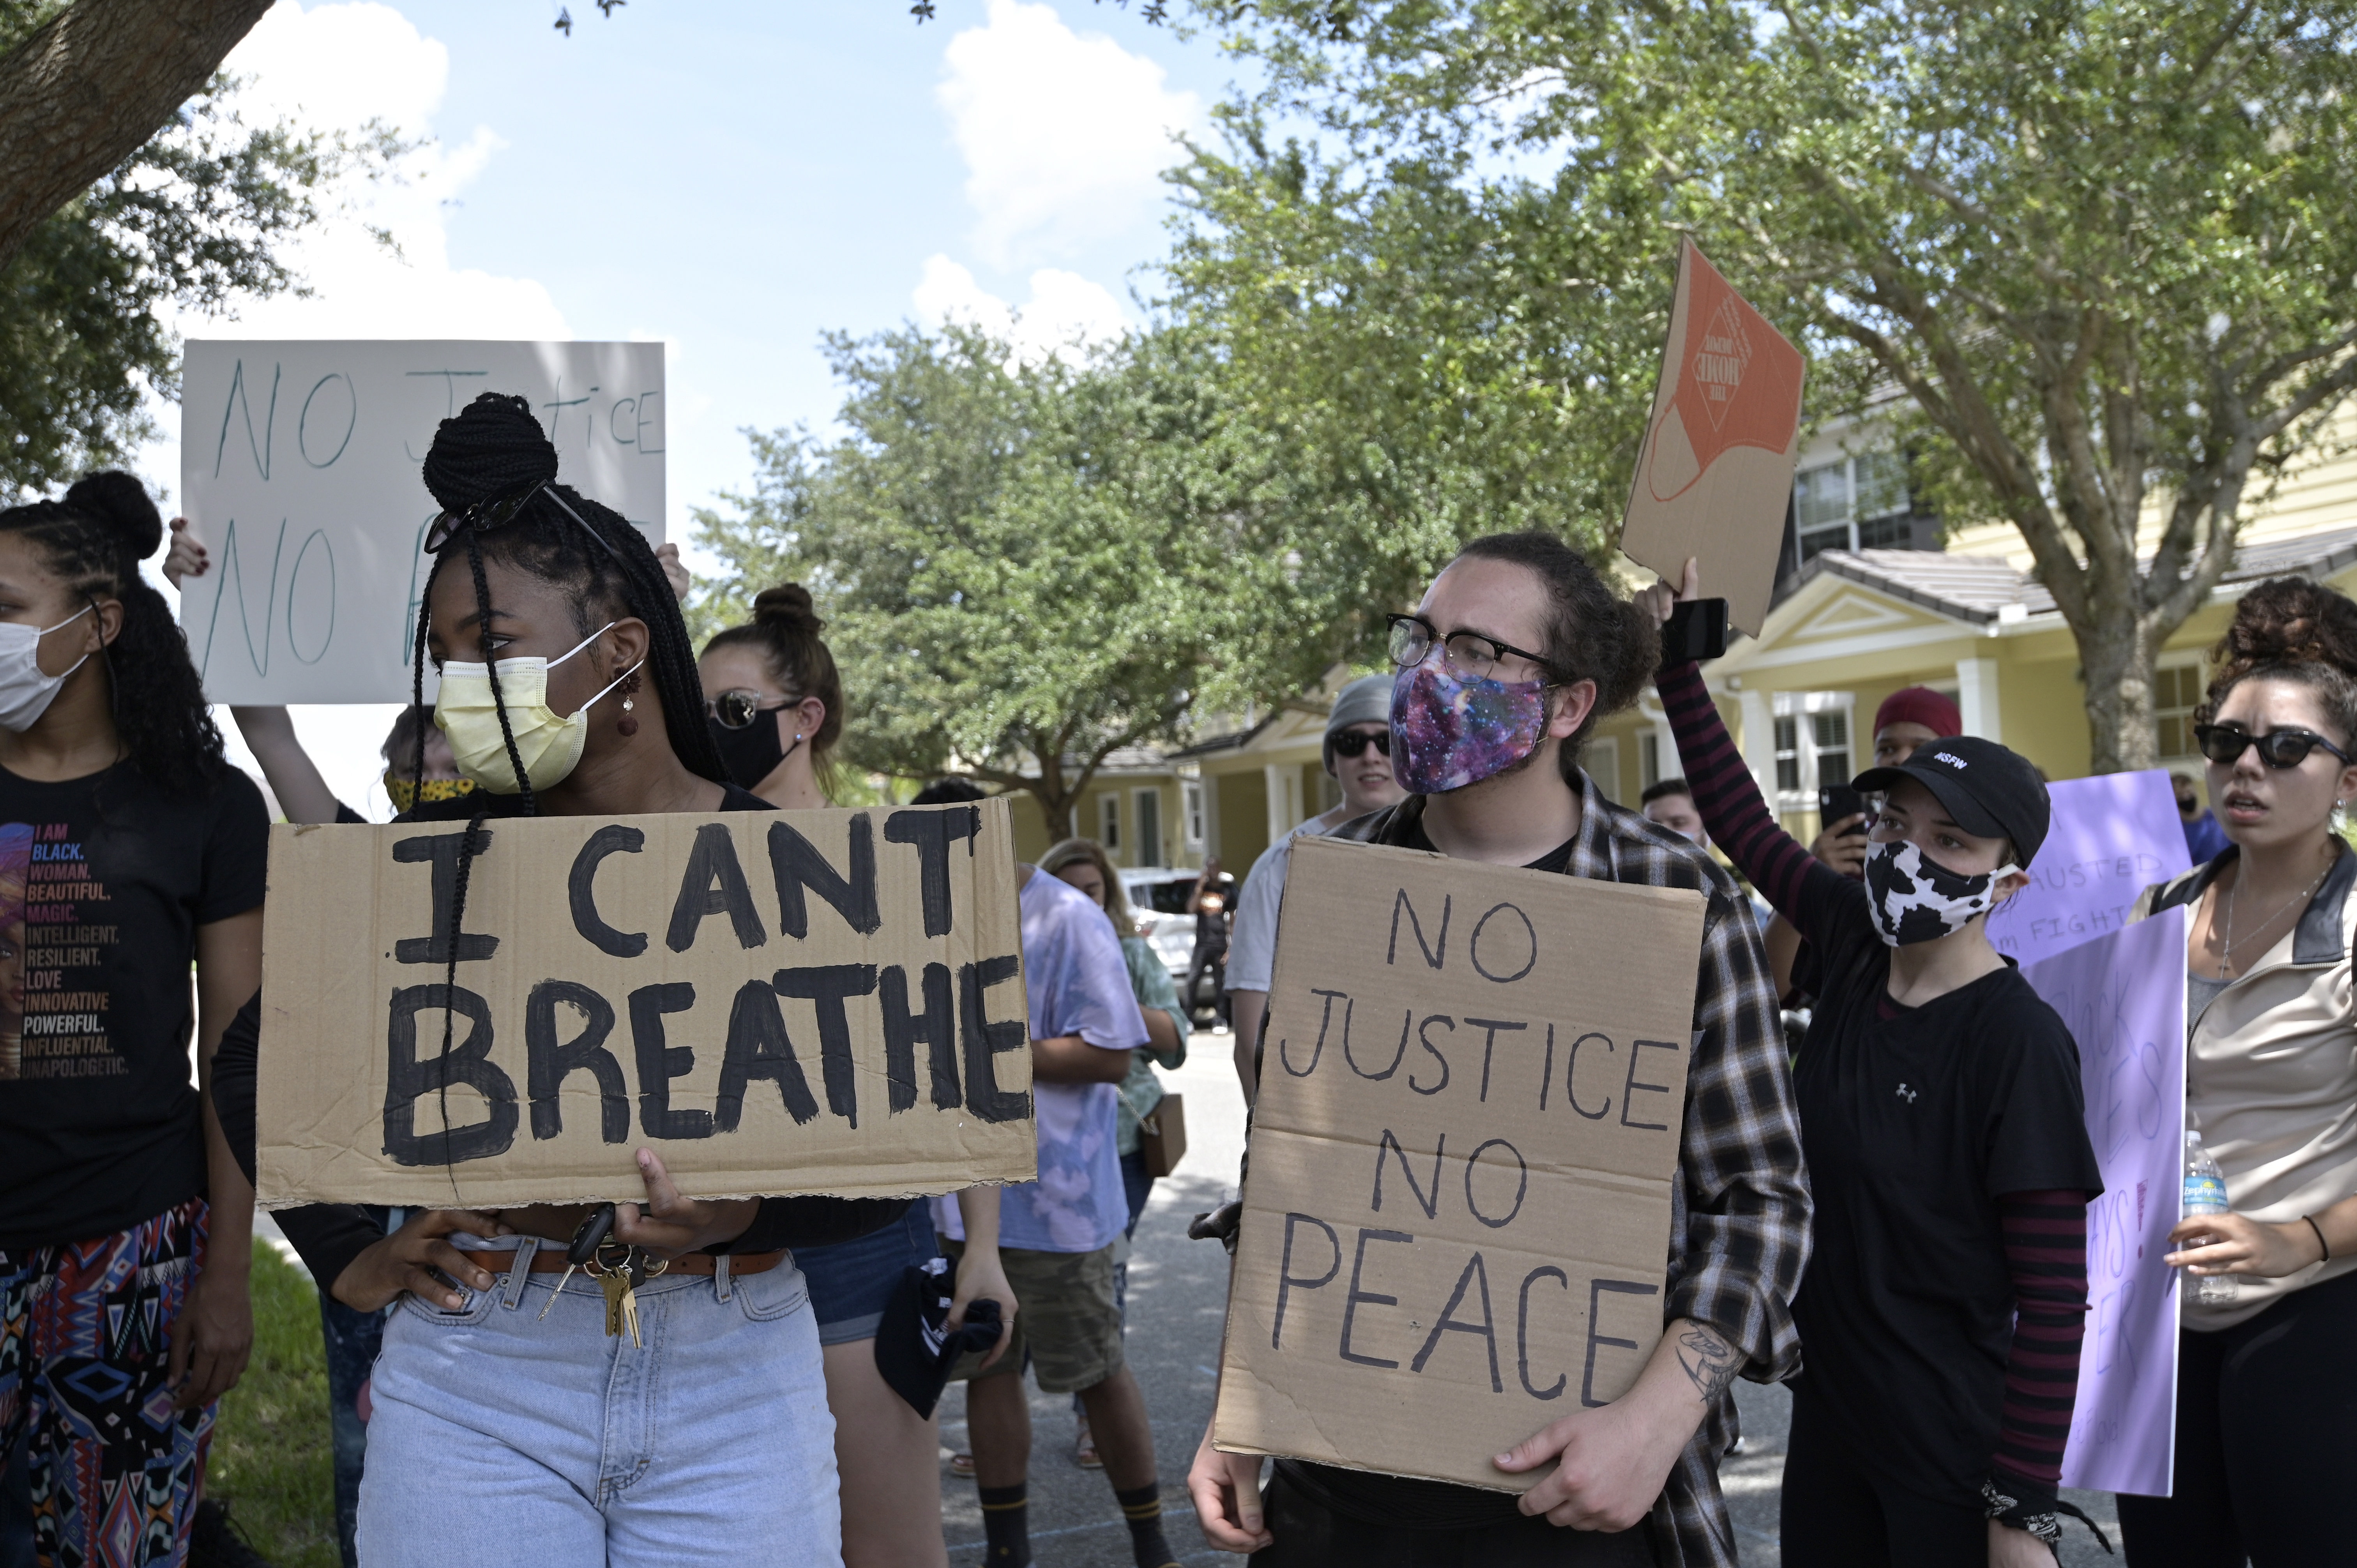 Protesters demonstrate in front of a townhouse owned by Minneapolis police officer Derek Chauvin, in Florida. Chauvin was one of four officers charged with the murder of George Floyd.